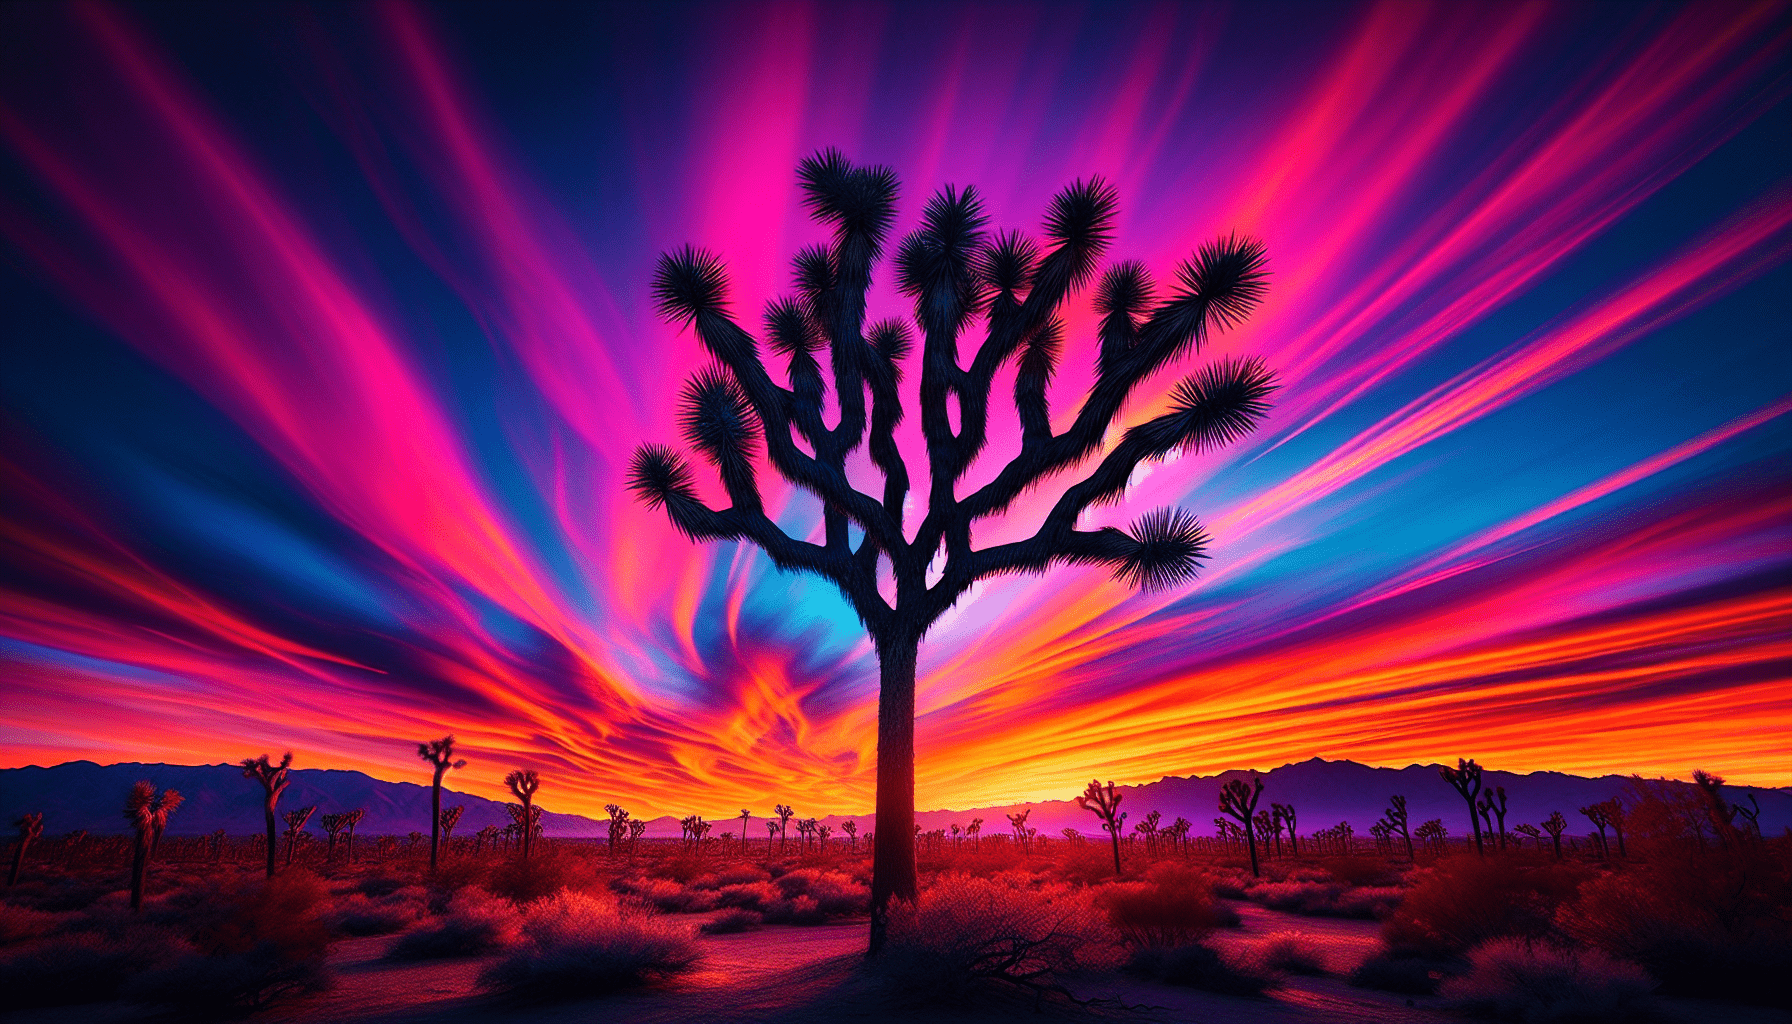 Discover the Desert Beauty of Joshua Tree and Palm Springs: A Day Trip from LA